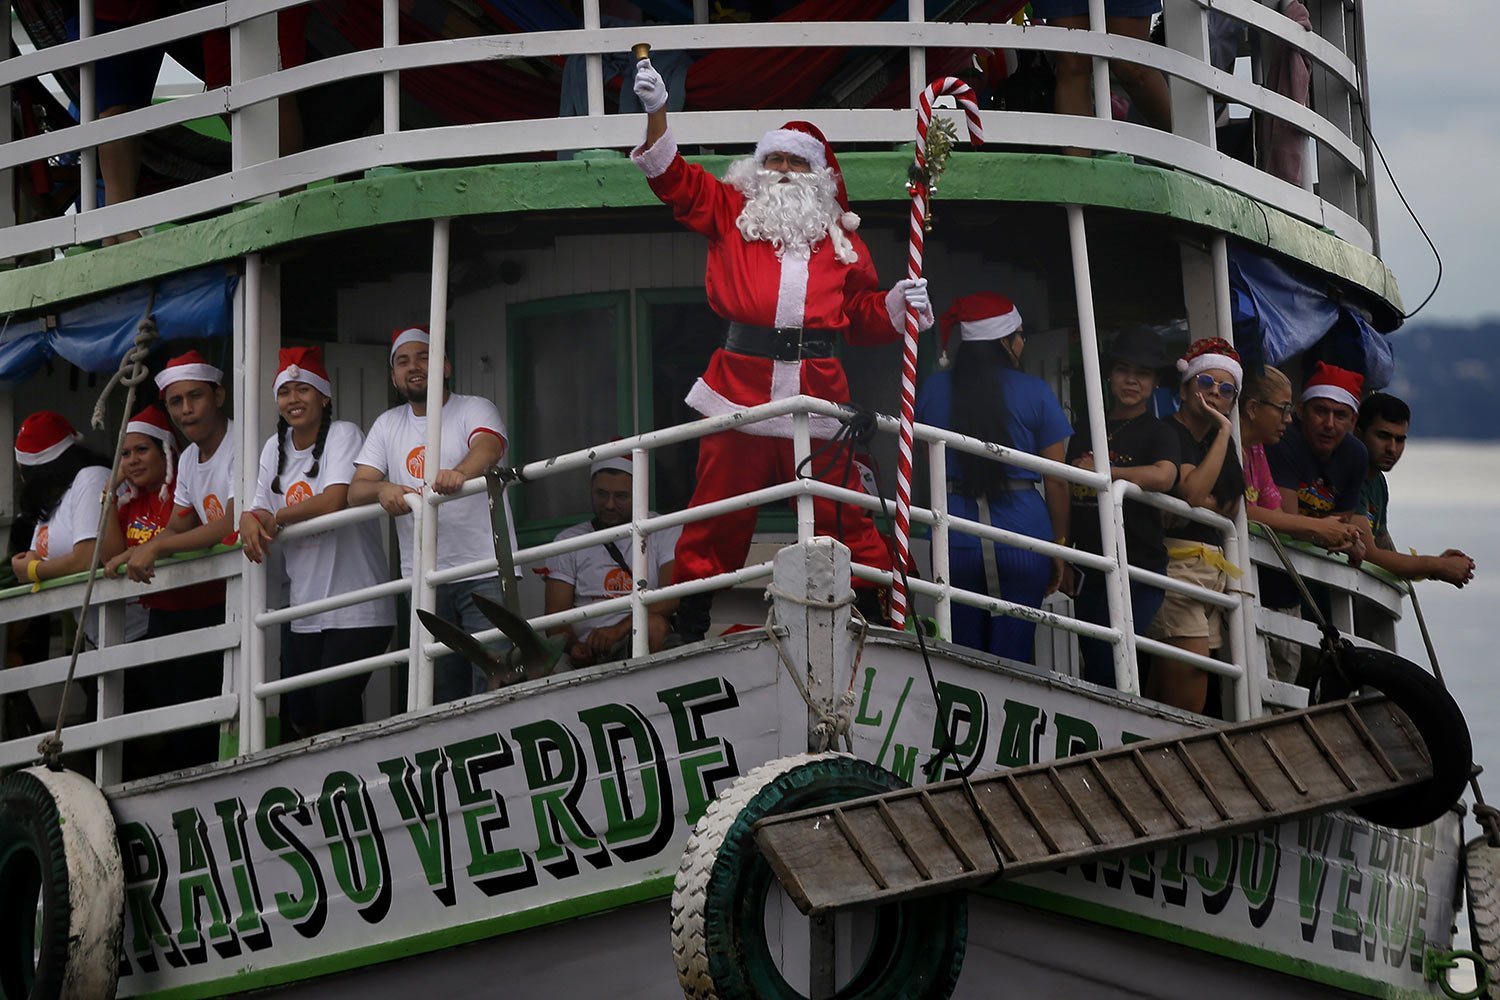  Jorge Barroso, dressed as Santa Claus, rings his bell while standing on the stern of boat as he arrives to distribute gifts to children in the riverside communities of Manaus, Amazonas state, Brazil, Saturday, Dec. 17, 2022. (AP Photo/Edmar Barros) 